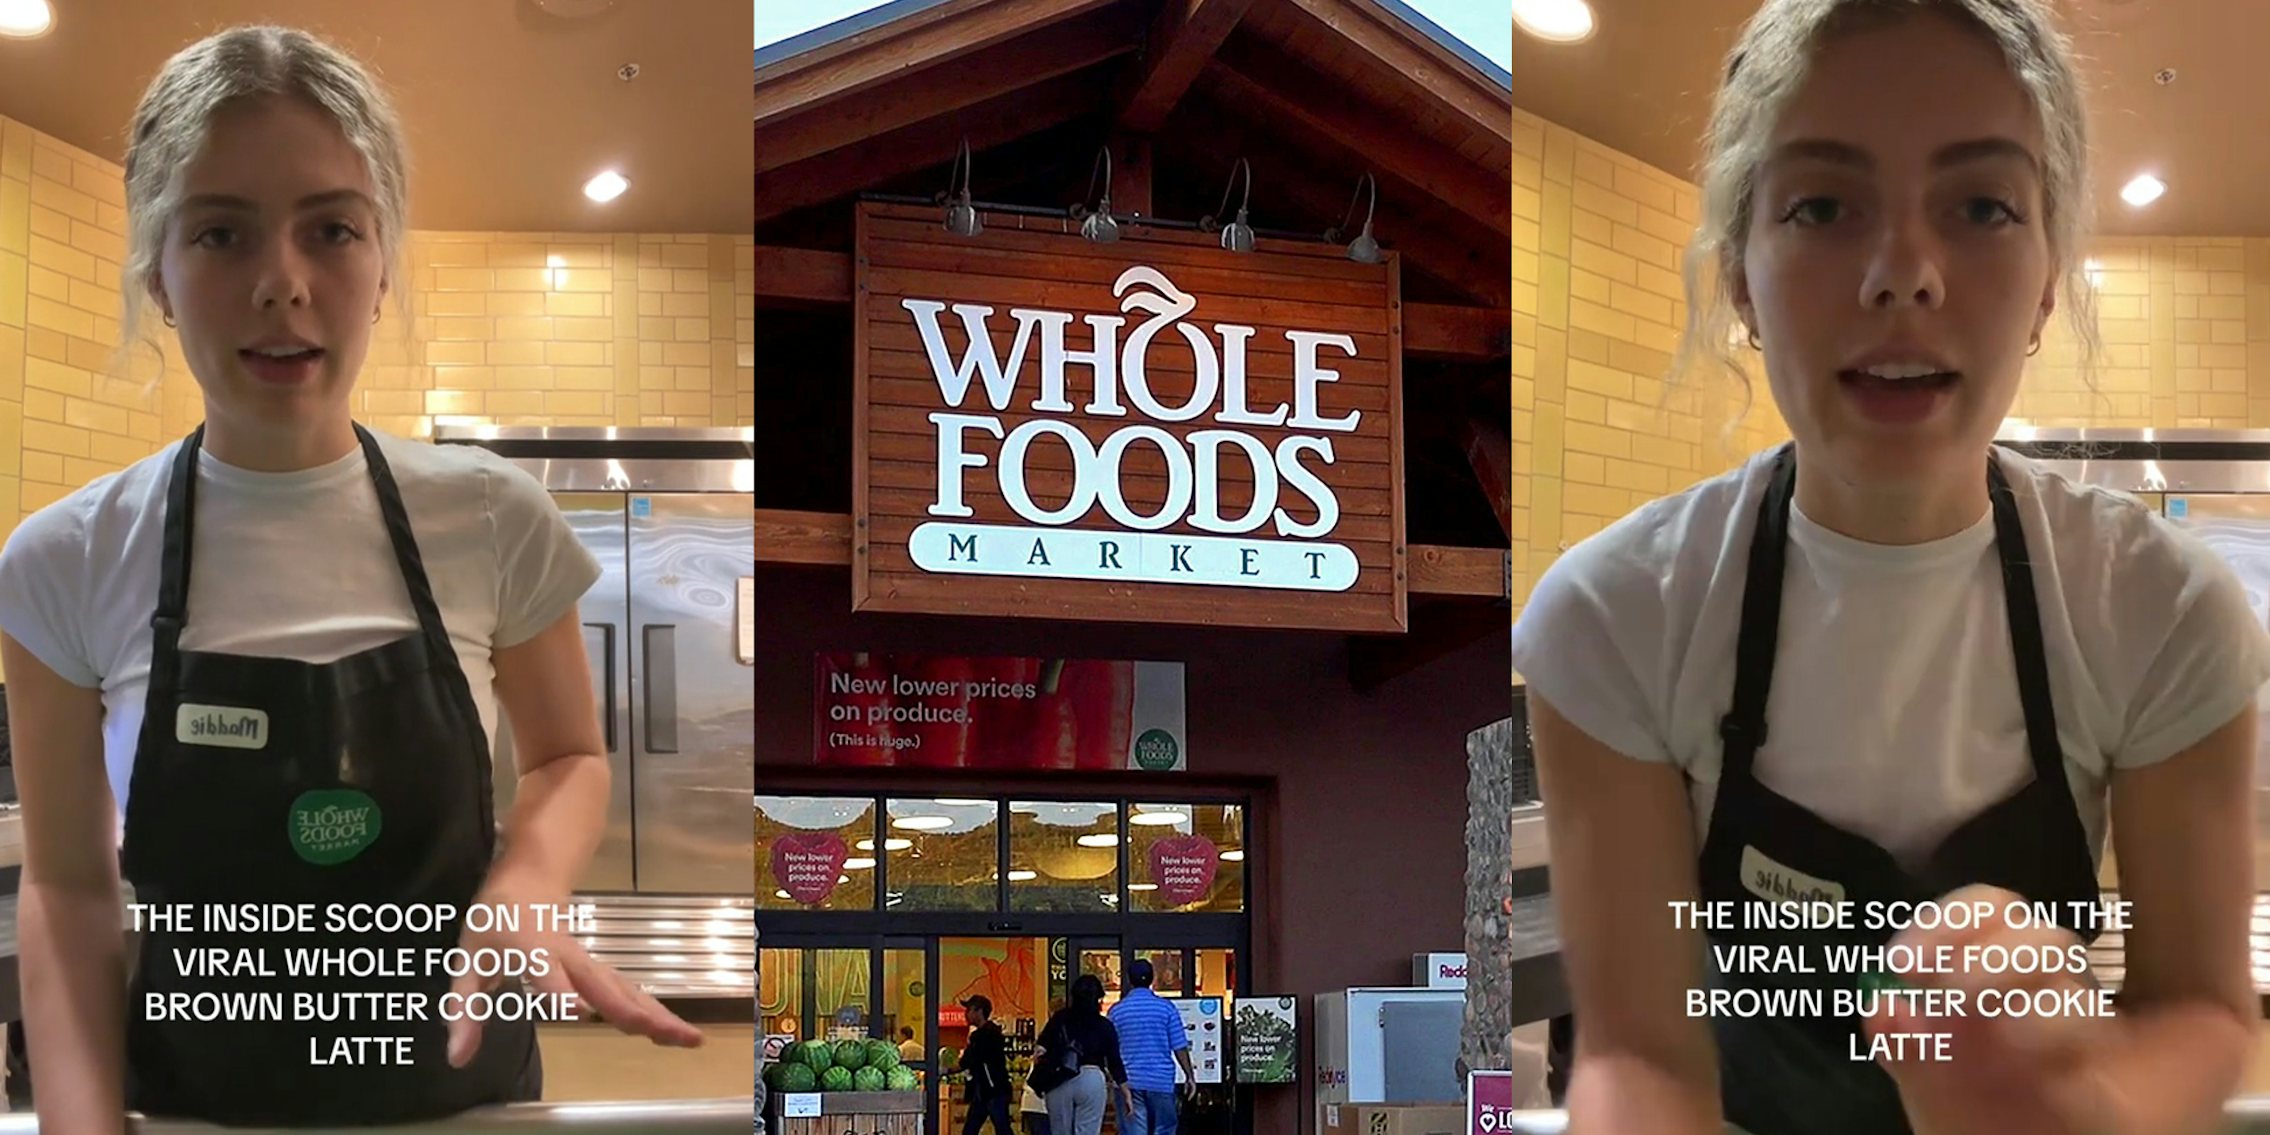 Whole Foods barista exposes brown butter cookie latte, says it’s just PSL